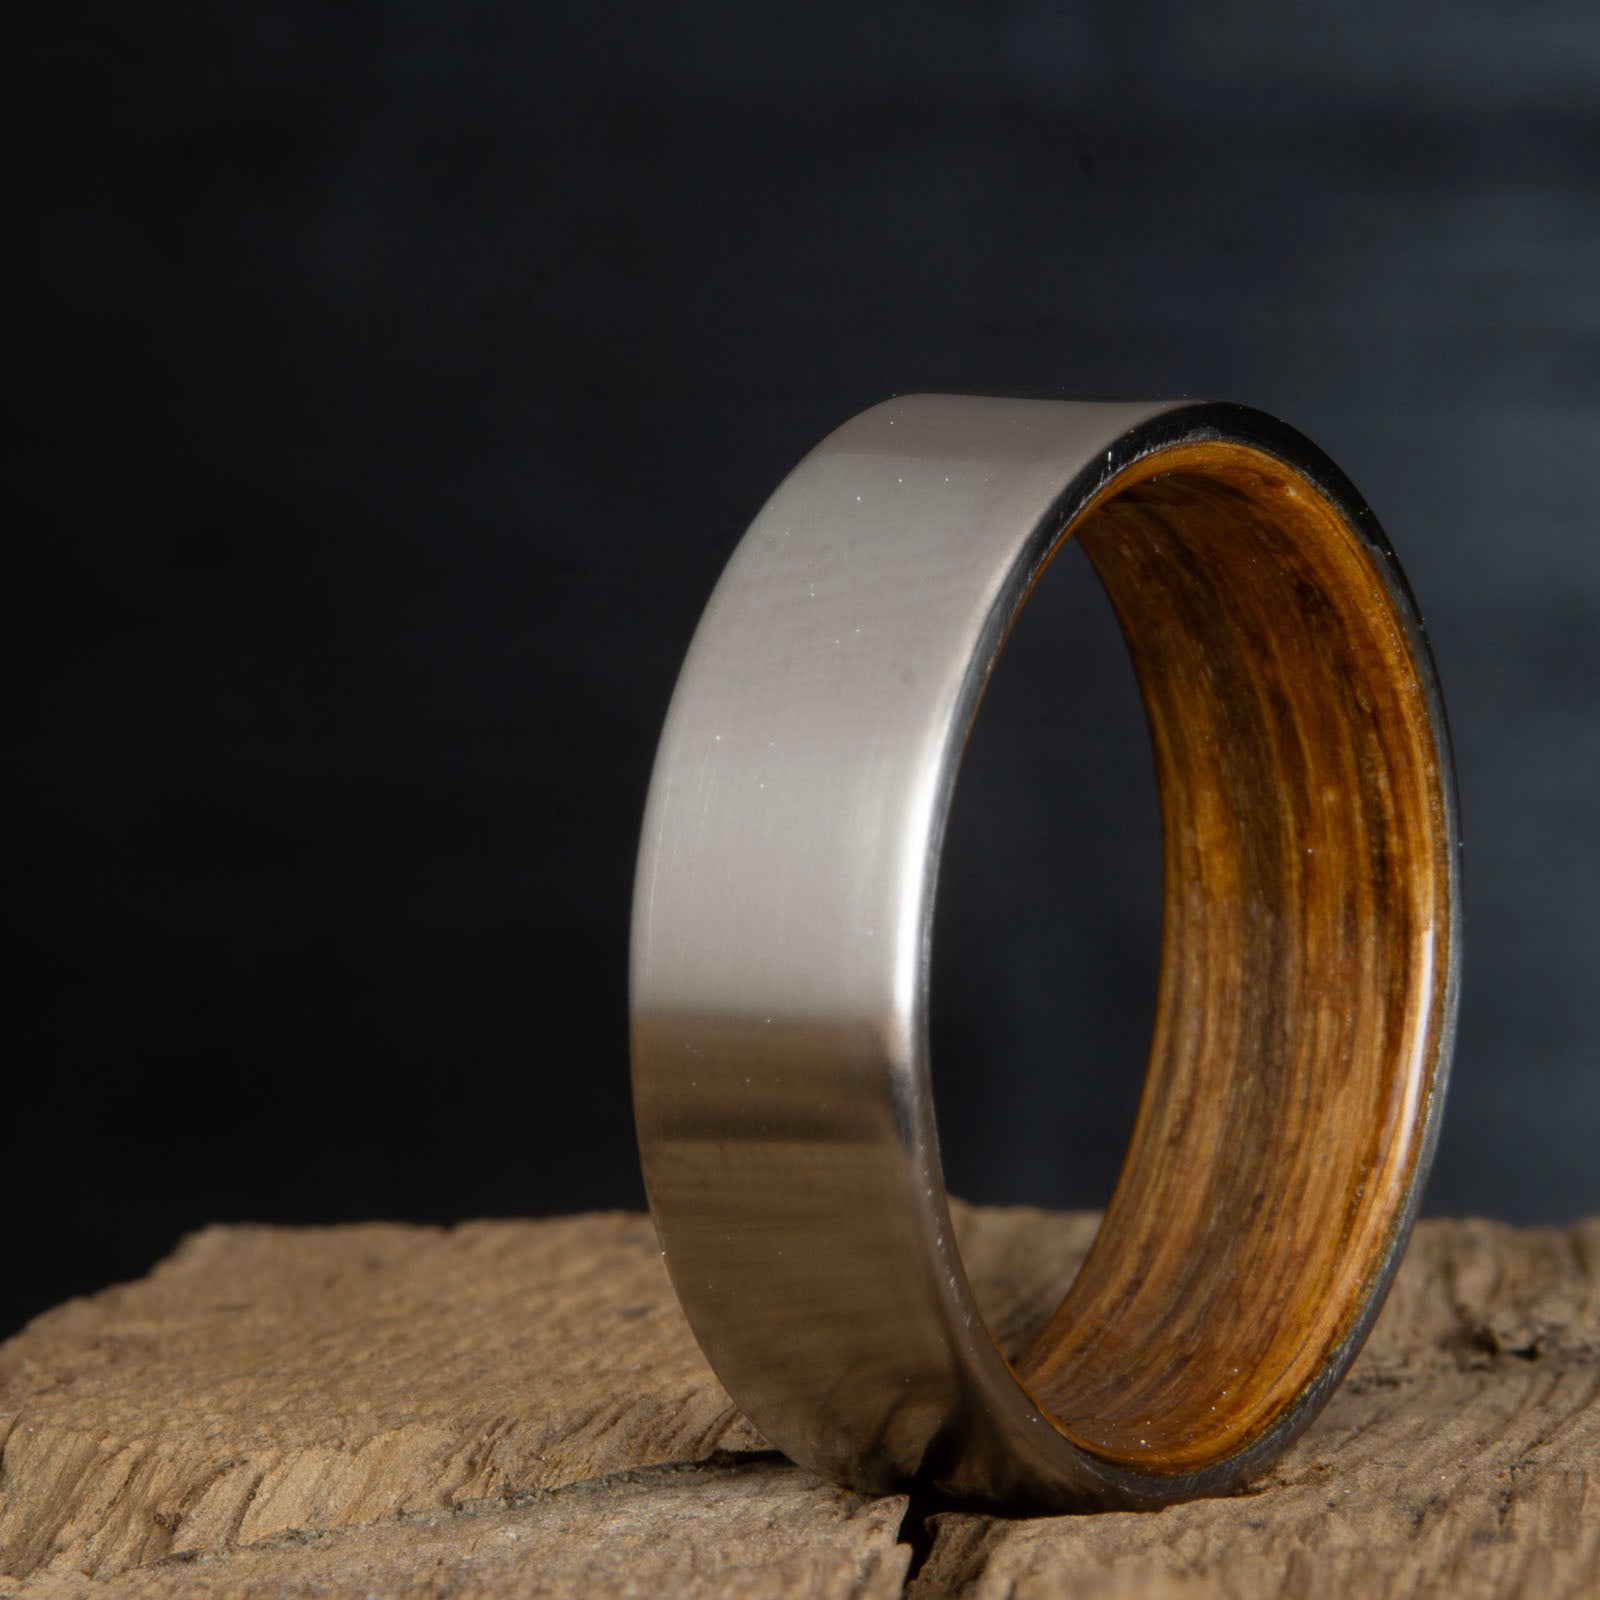 Satin Titanium Wood Lined Ring with Whiskey Barrel White Oak 6mm / 5-14 whole-half-quarter-available-enter in Notes During Checkout